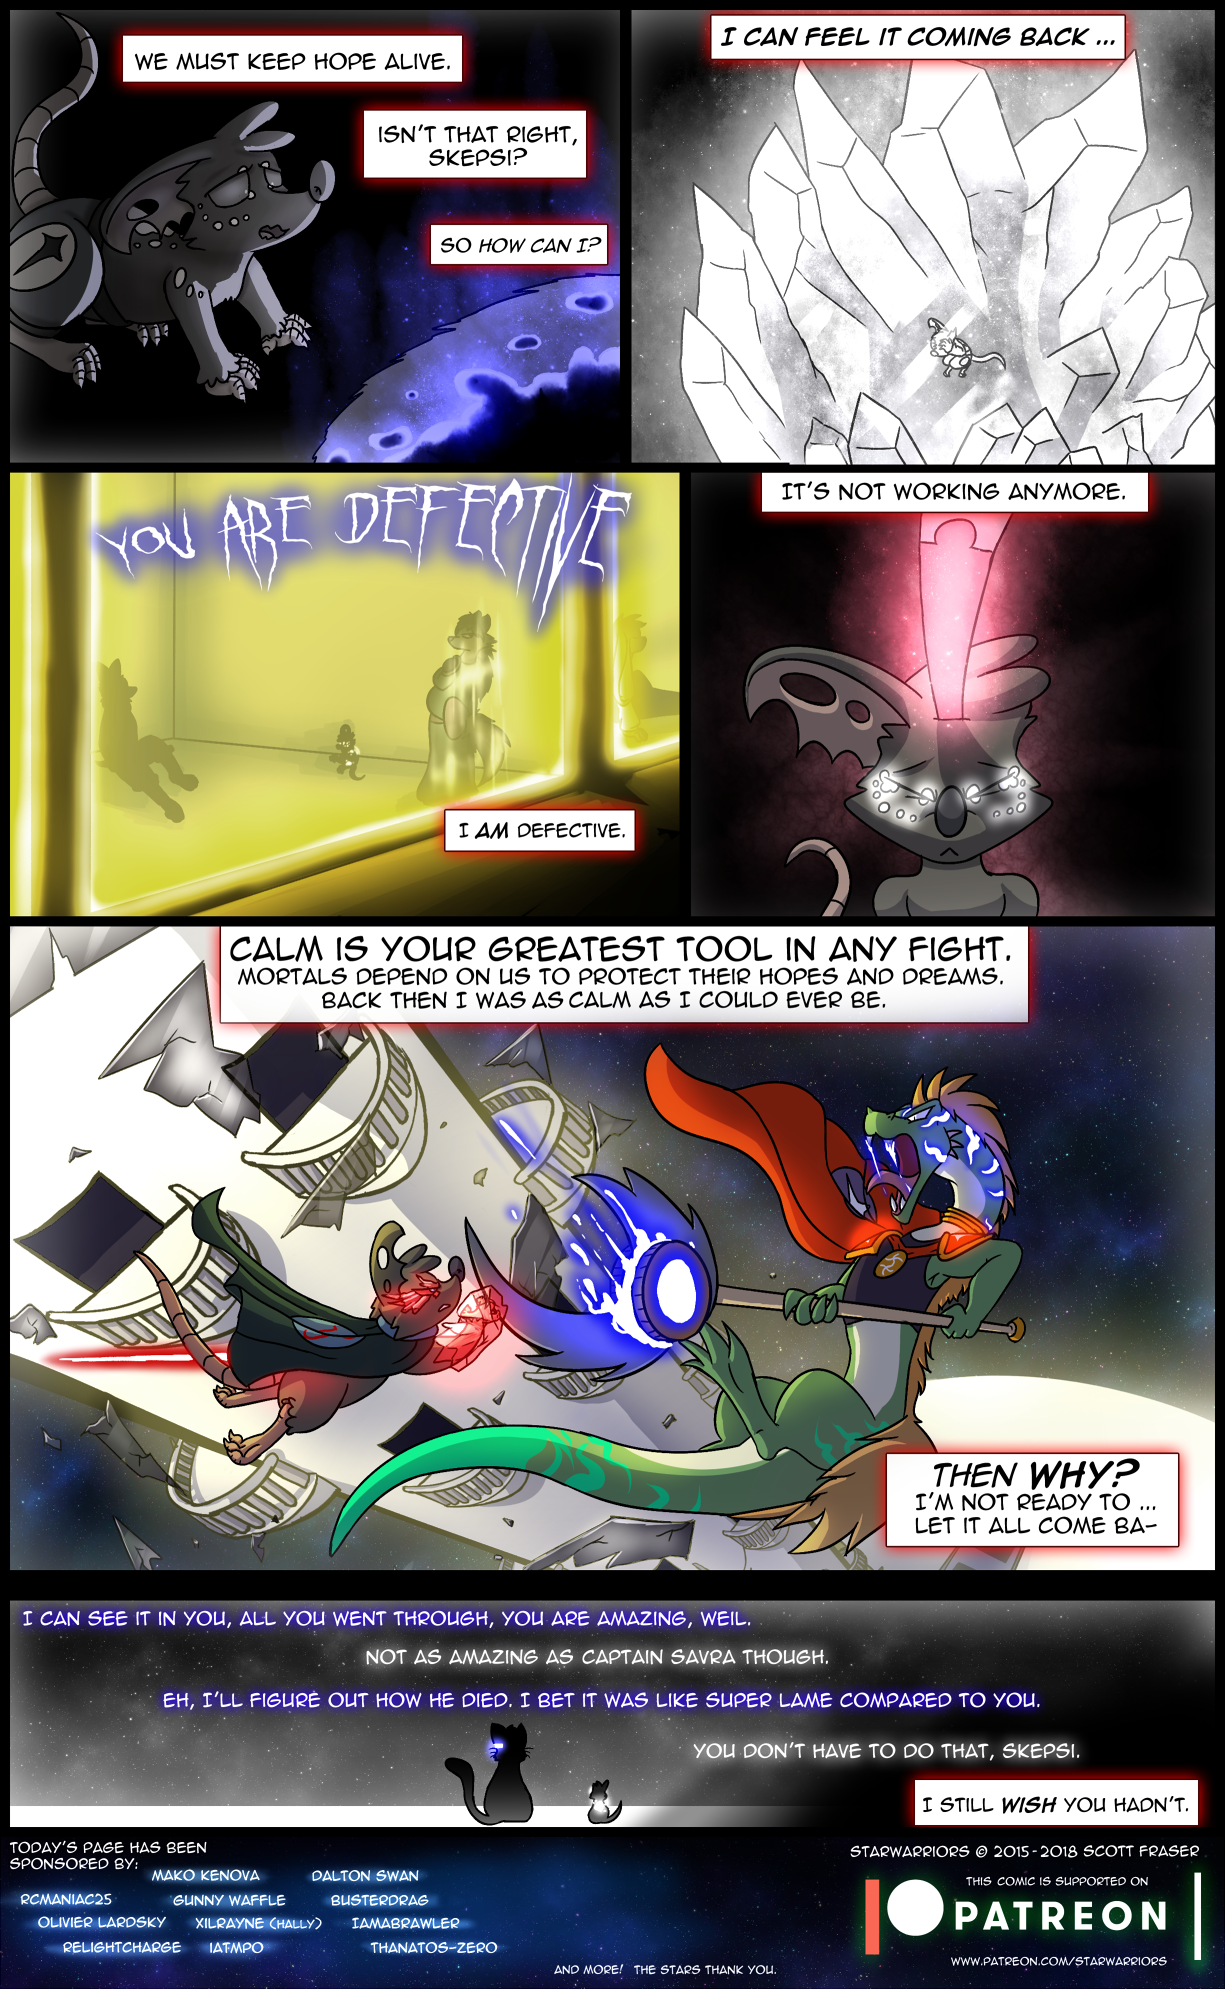 Ch4 Page 2 – Defective